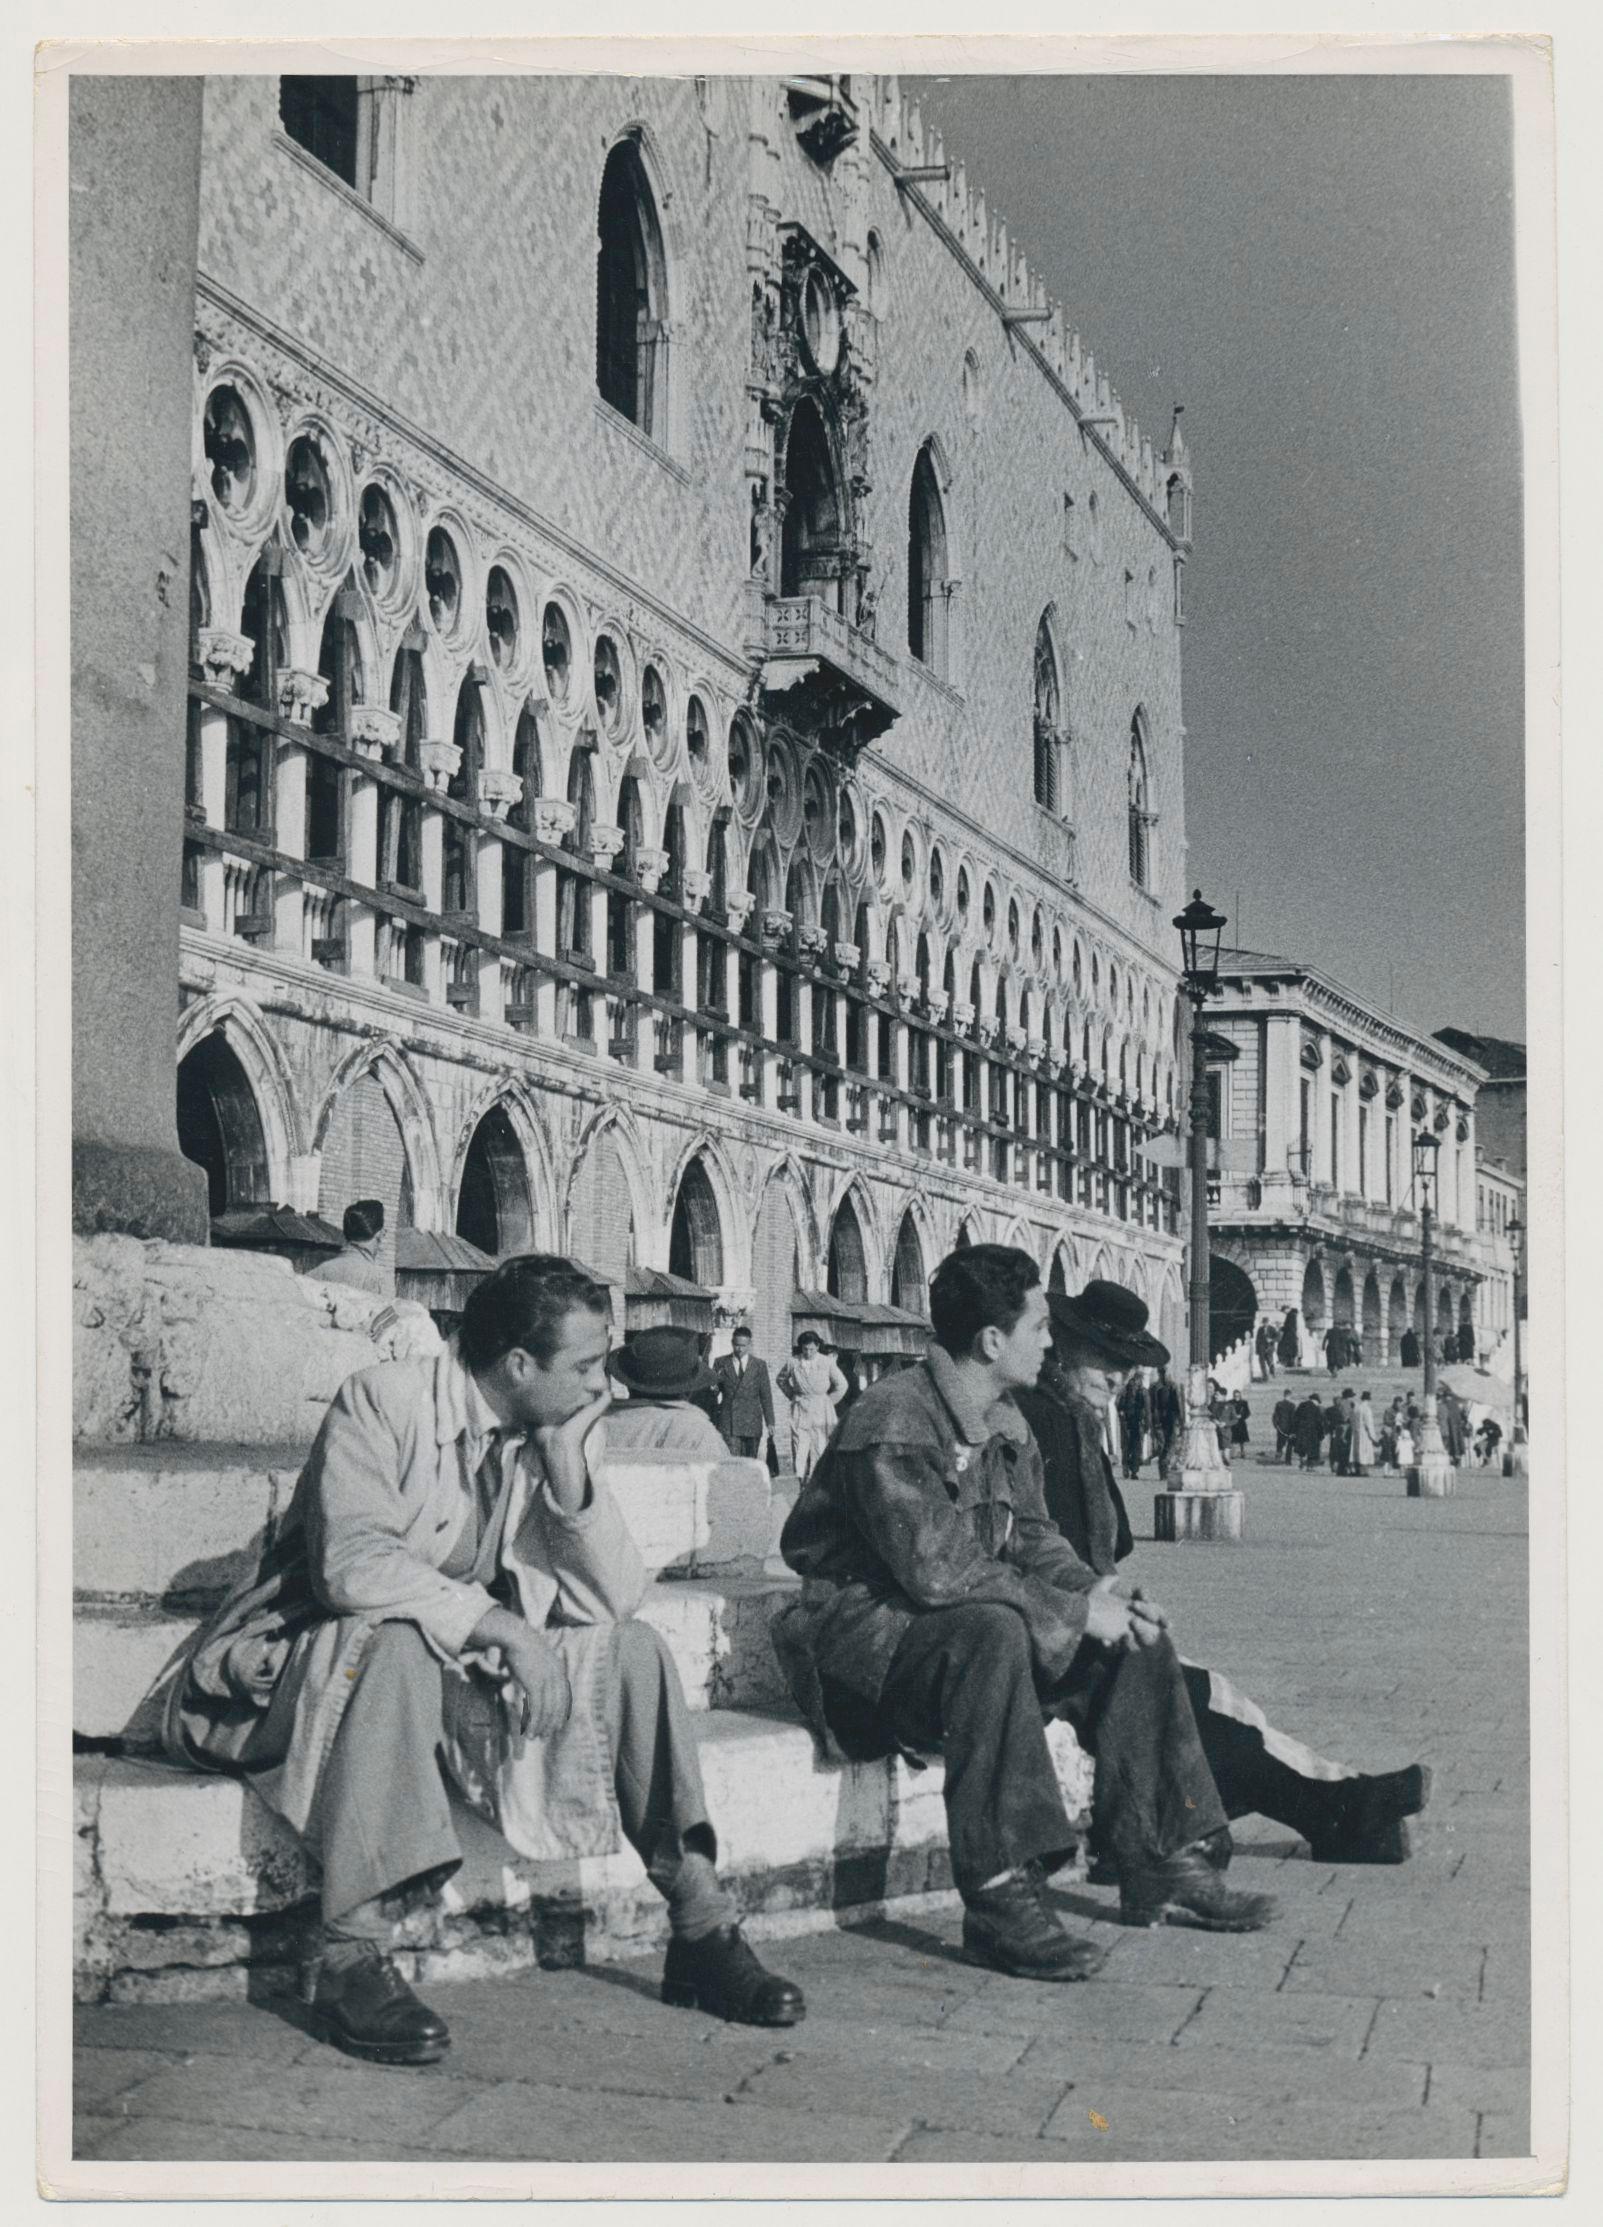 Erich Andres Black and White Photograph - Venice - Men sitting at Markus Square, Italy 1950s, 18, 2 x12, 9 cm